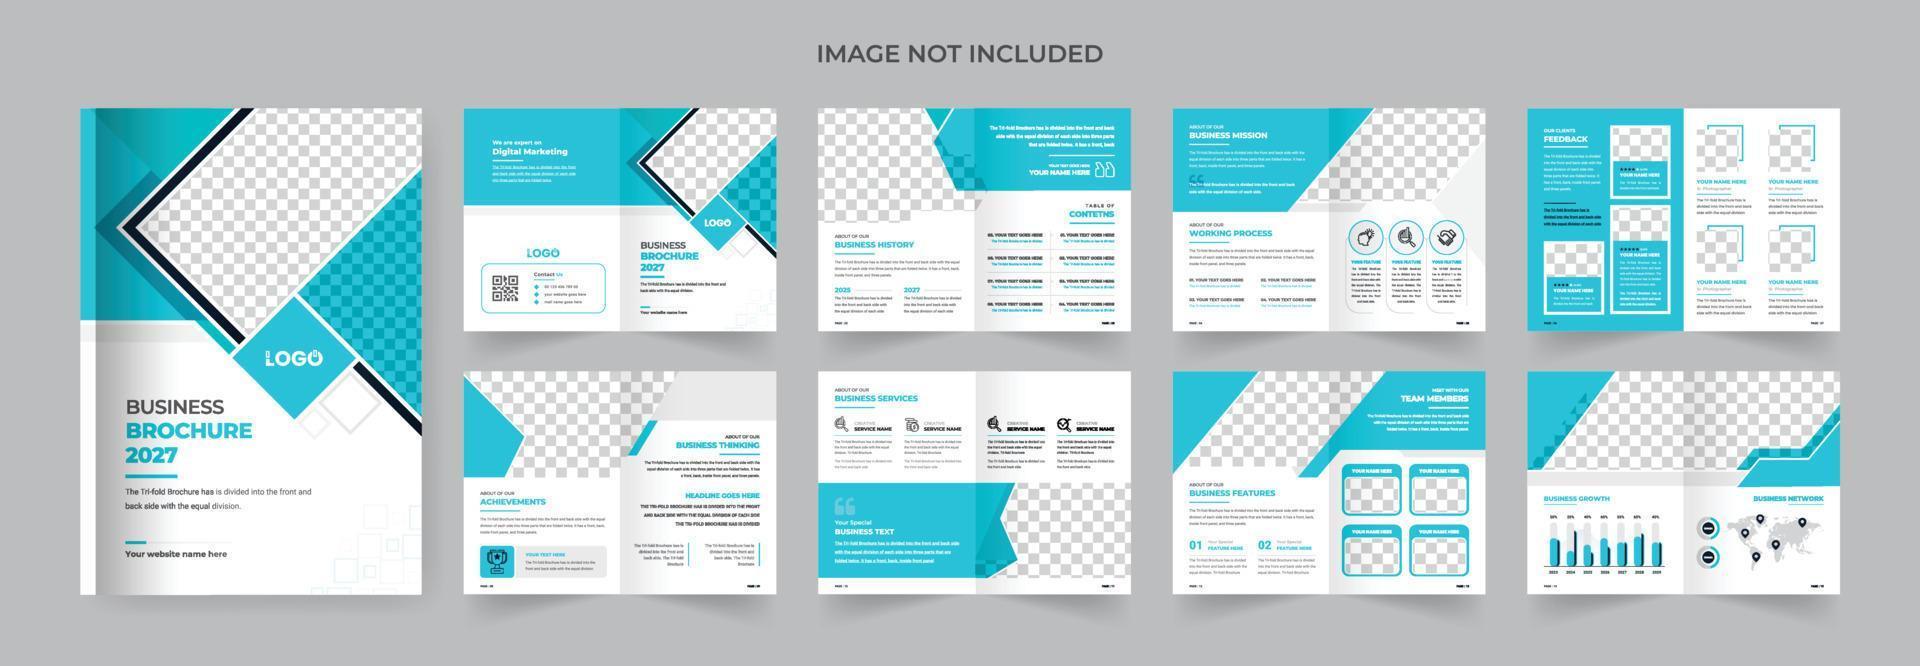 16 pages corporate company business brochure design template vector